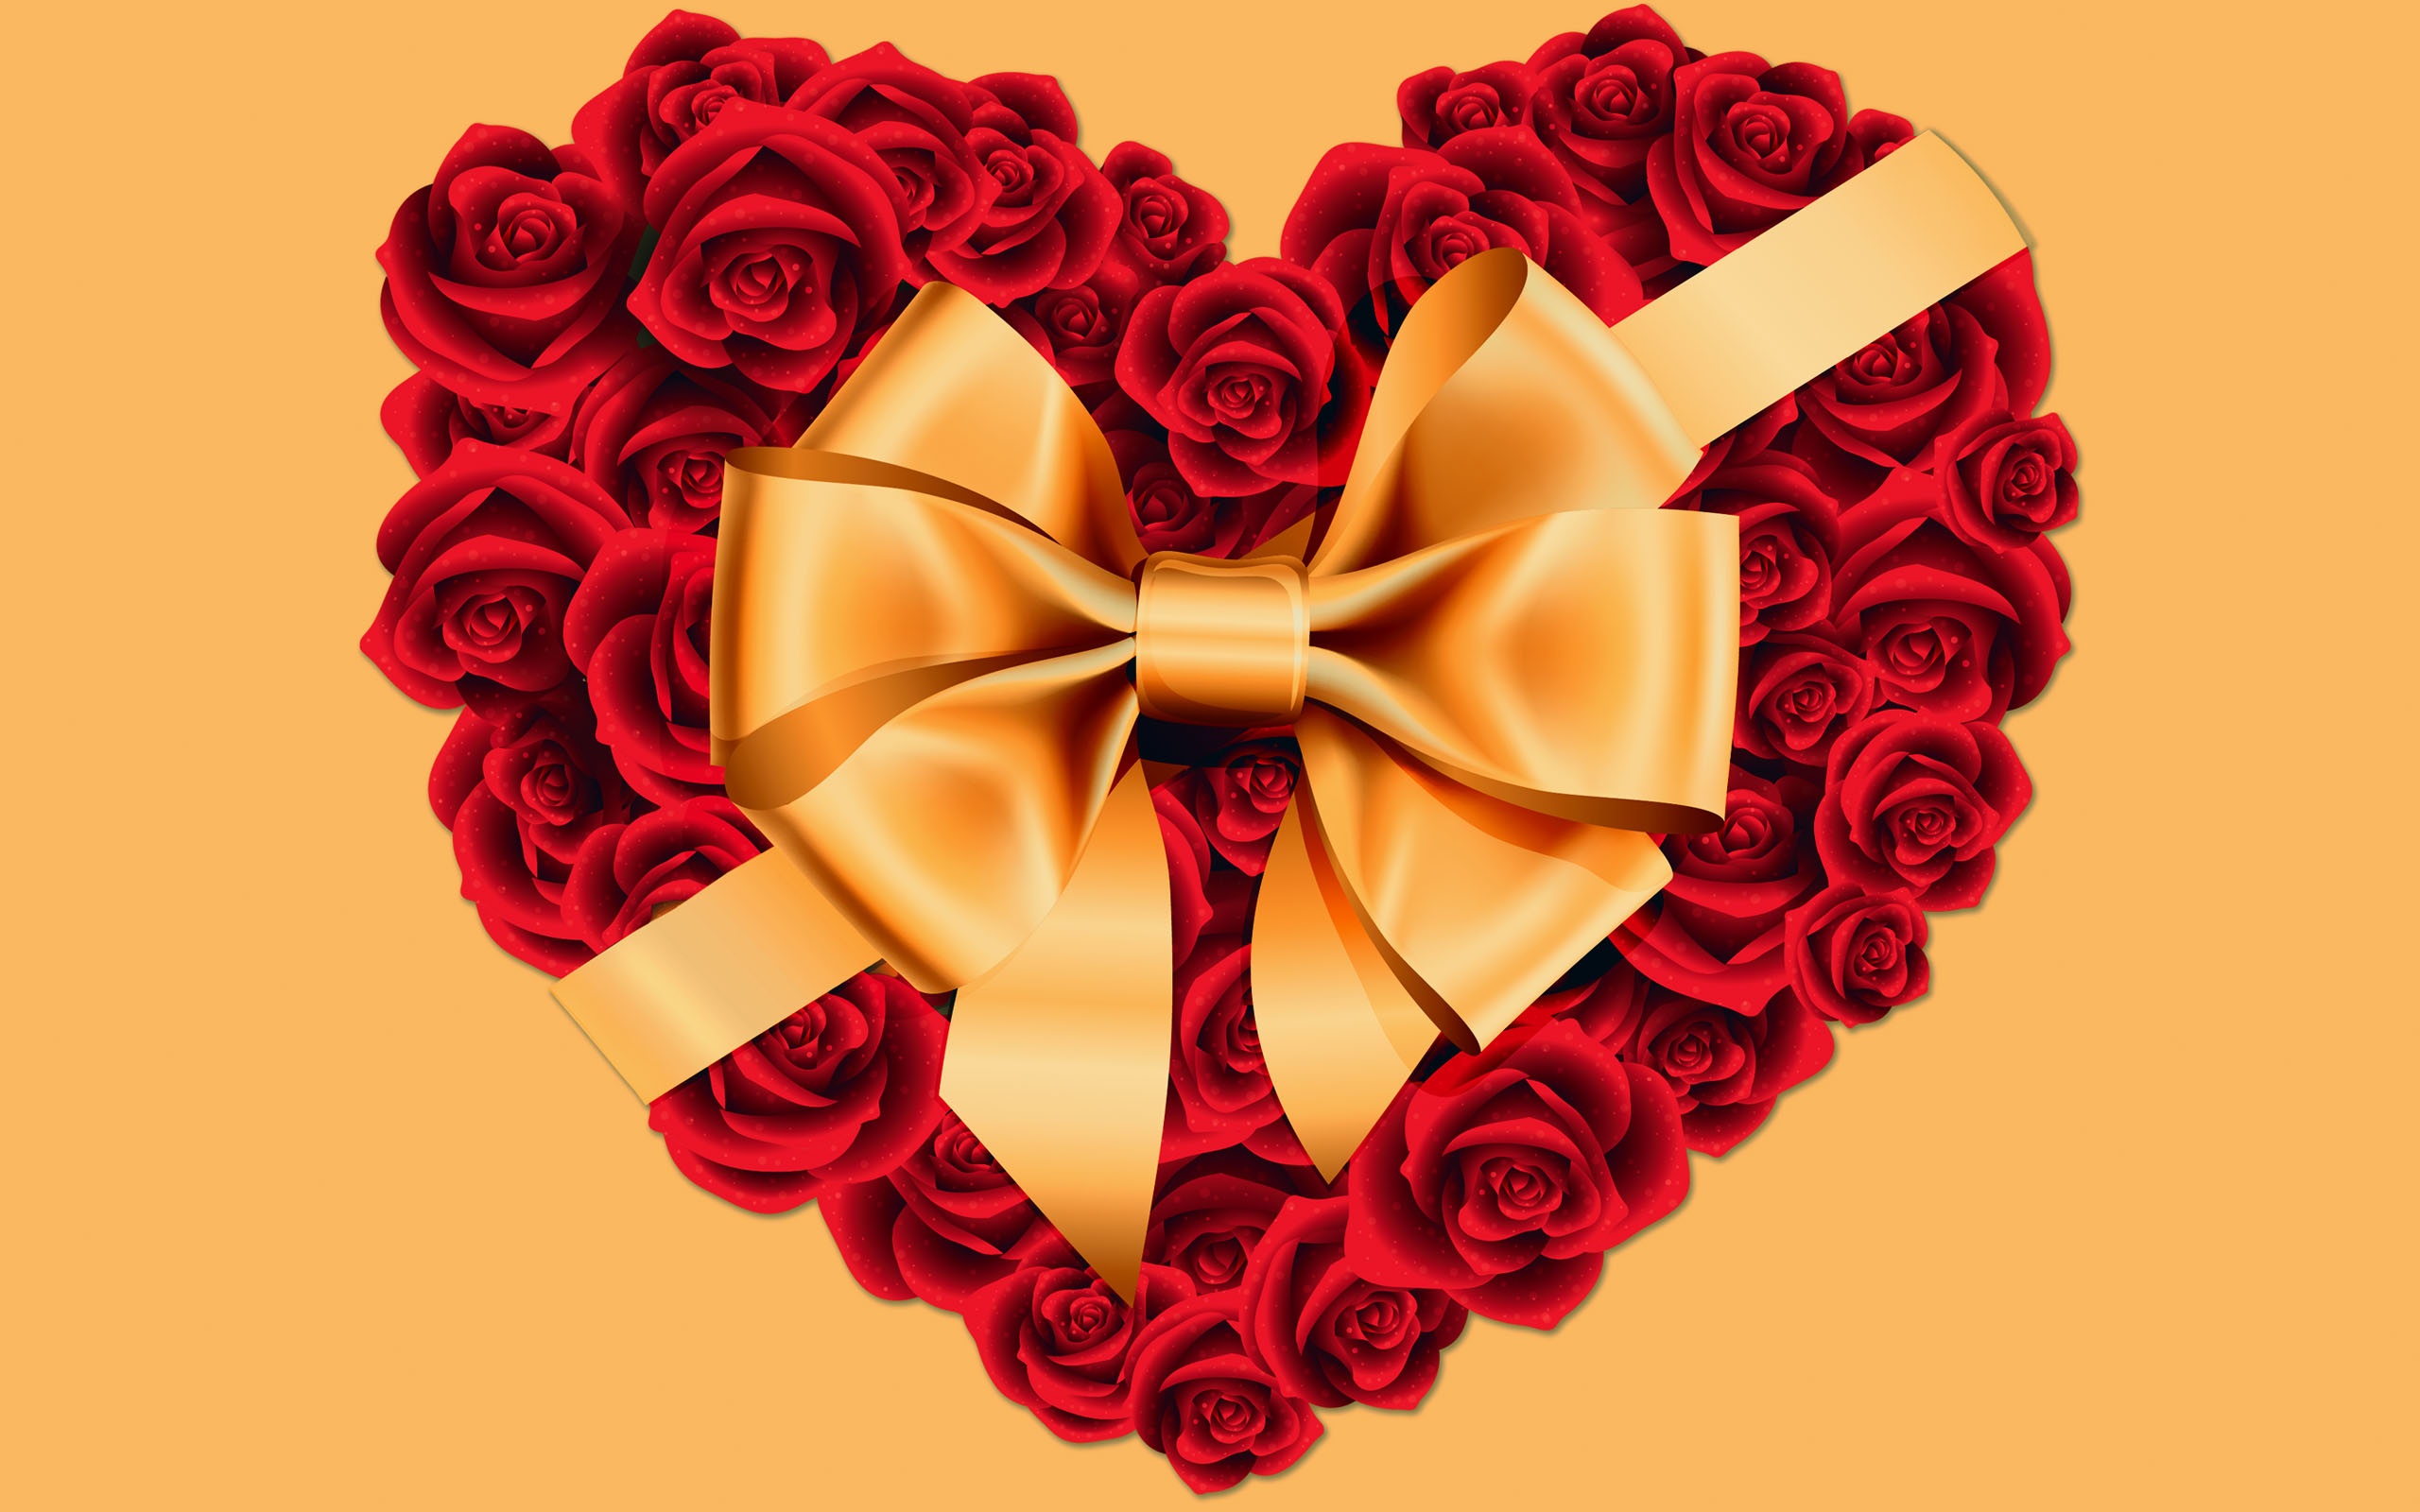 Large Rose Heart With Gold Bow - Gold Rose Good Morning - HD Wallpaper 